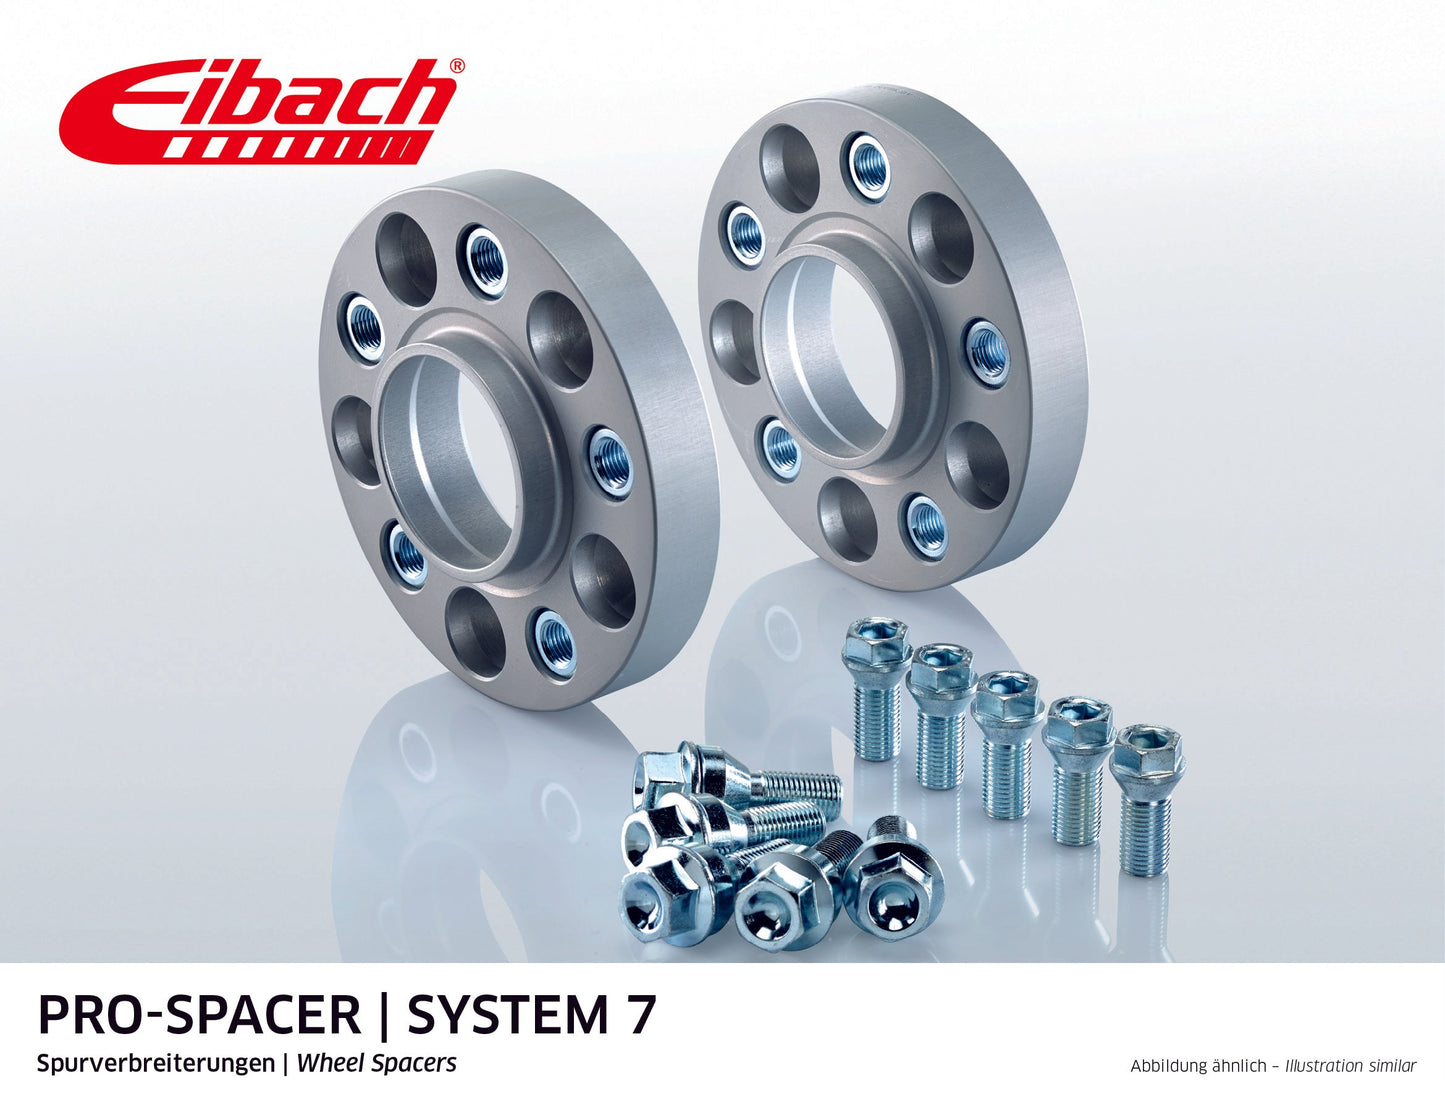 Eibach Pro-Spacer Kit (Pair Of Spacers) 20mm Per Spacer (System 7) S90-7-20-035 (Silver) at £188.70